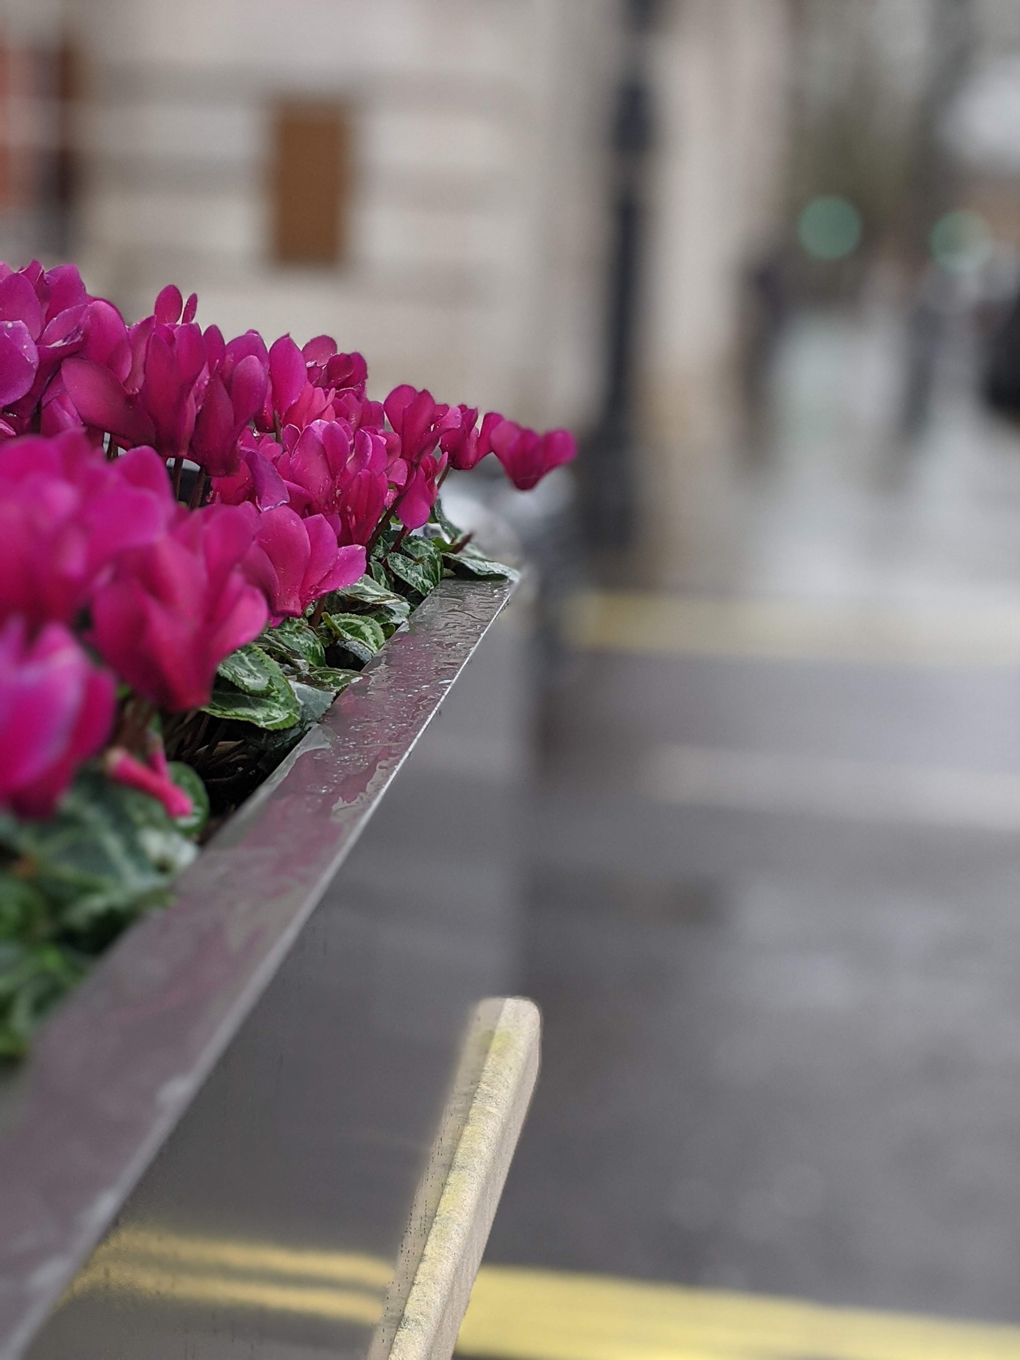 Pink flowers outside the Connaught hotel in Mayfair; blurred background, focus on flowers